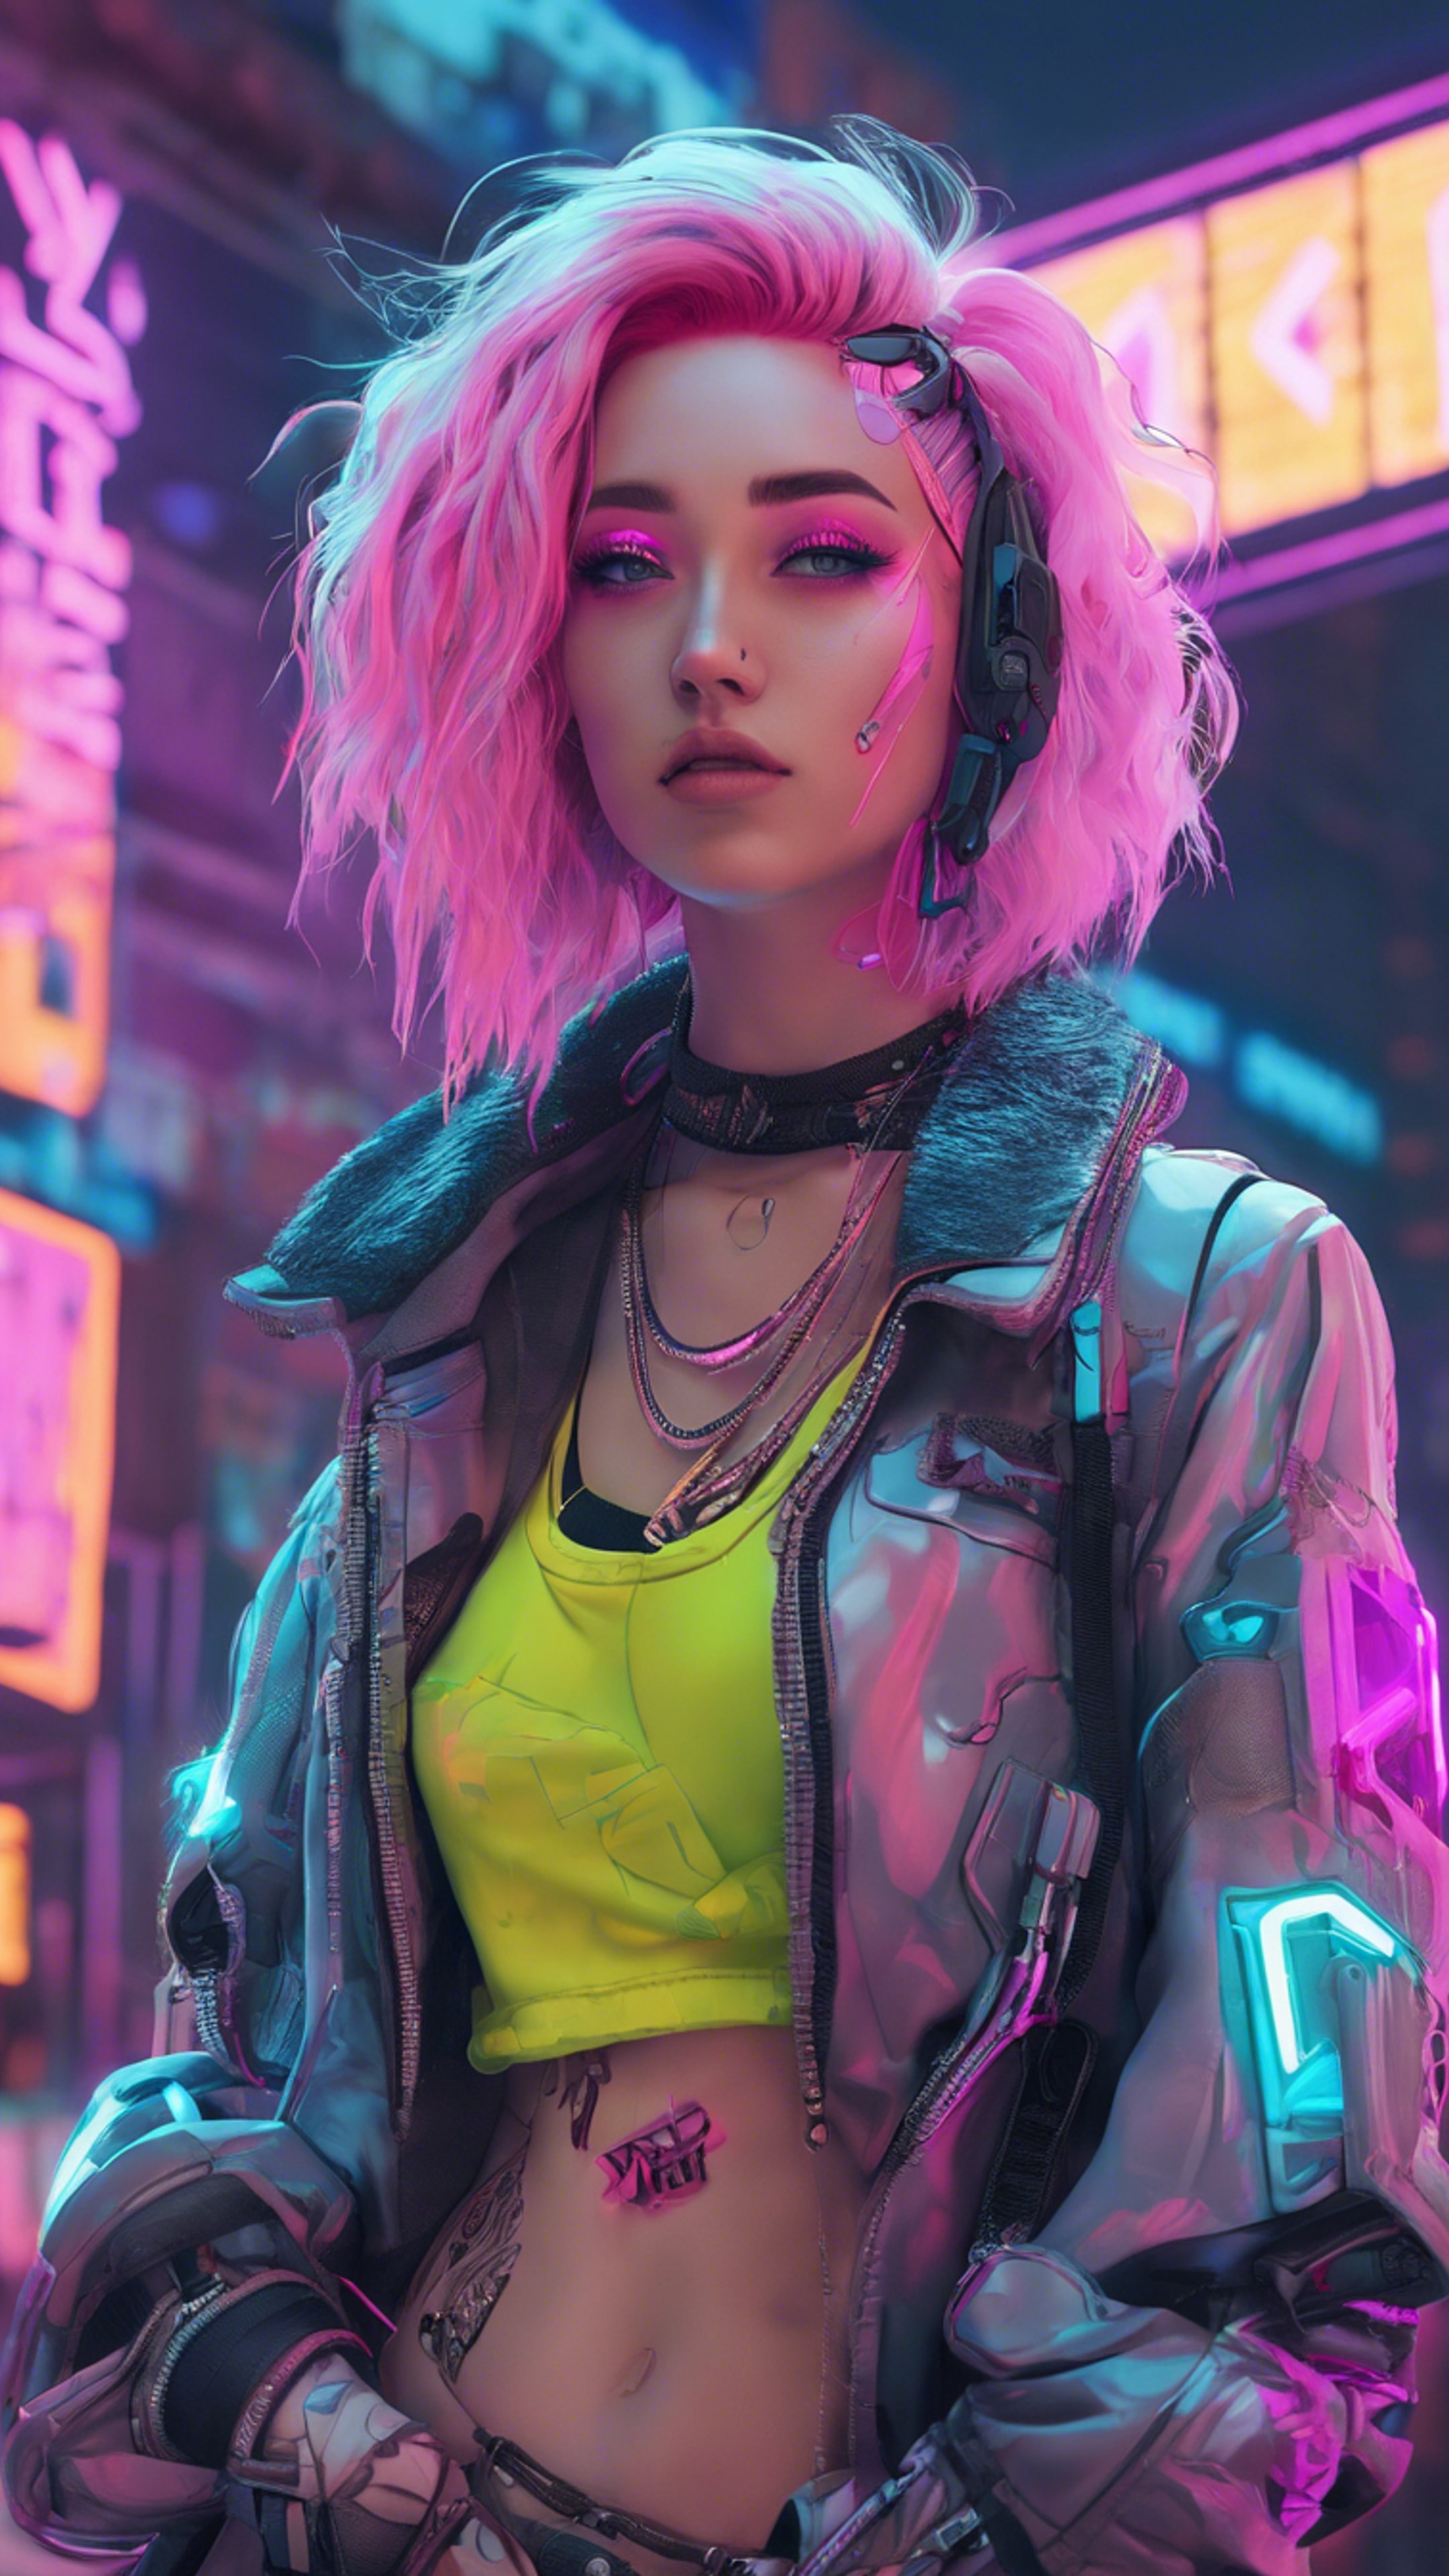 A pastel cyberpunk girl with brightly colored hair, standing in front of a neon sign. Обои[dbbad63d7b584975aa4e]